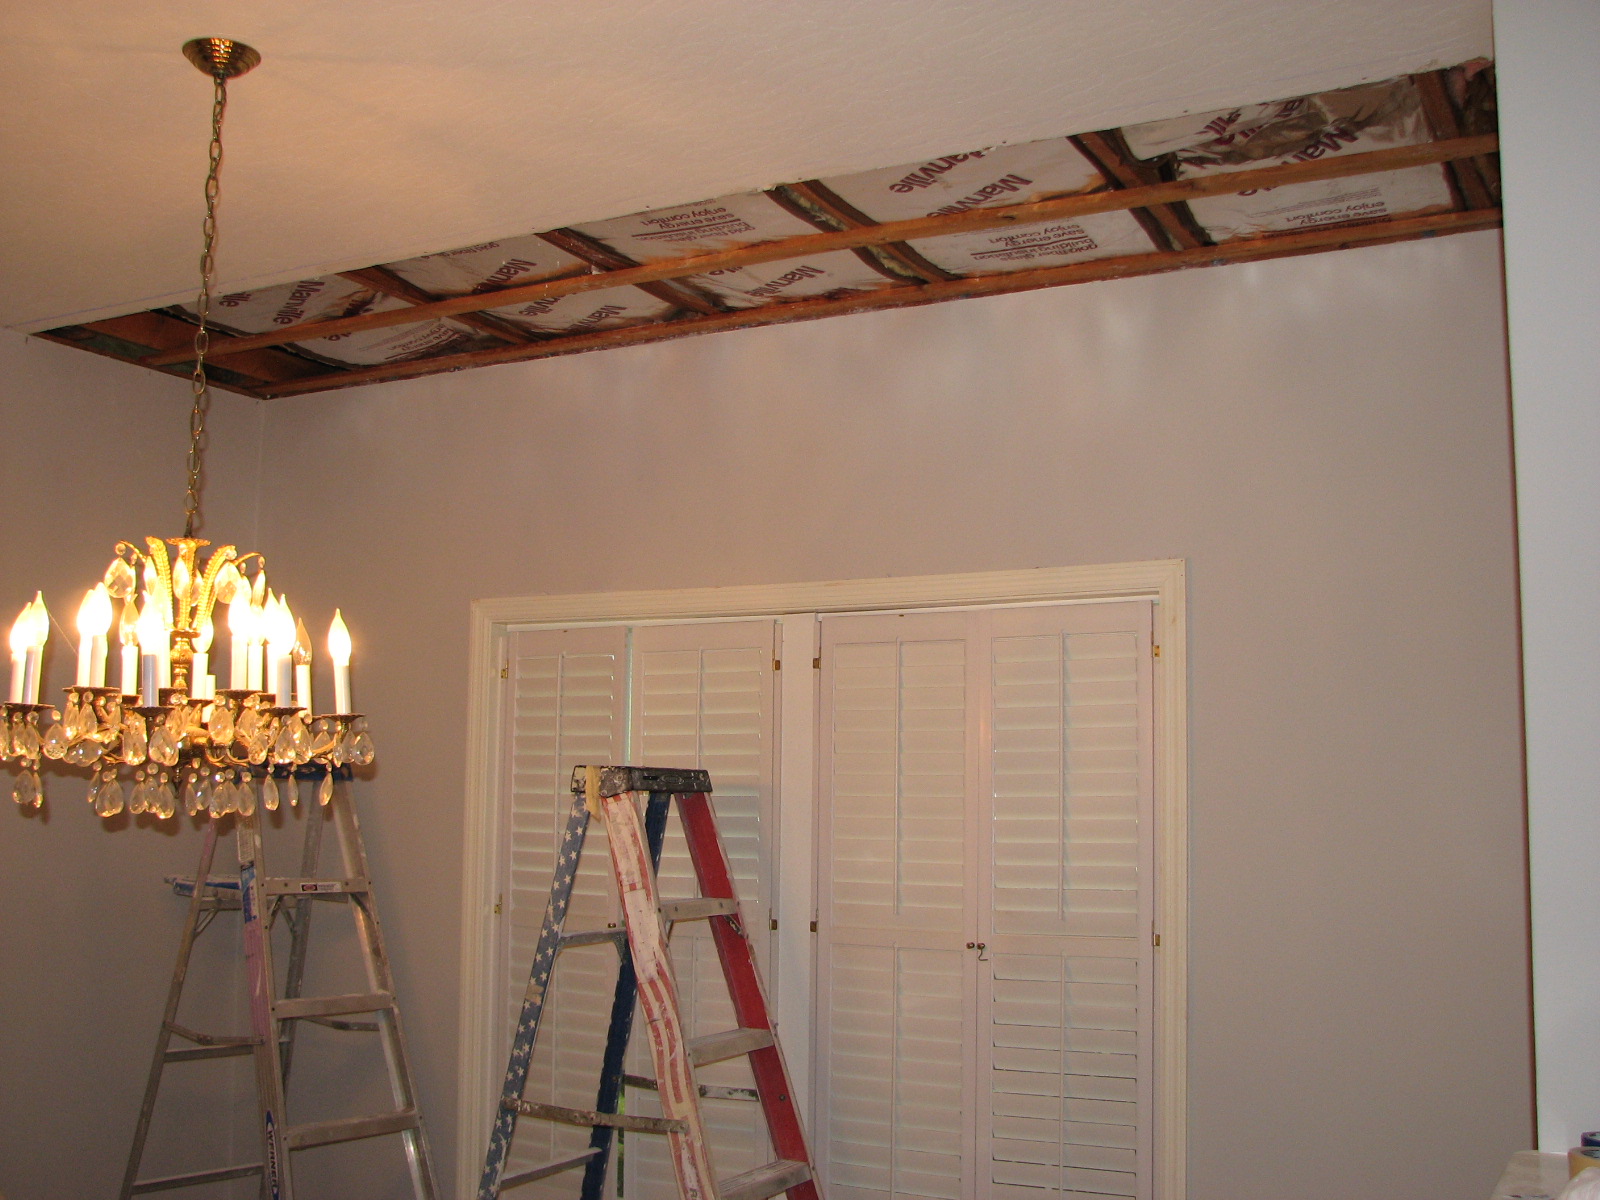 Indialantic Ceiling Repair and Skip Trowel Texture Match - Peck Drywall